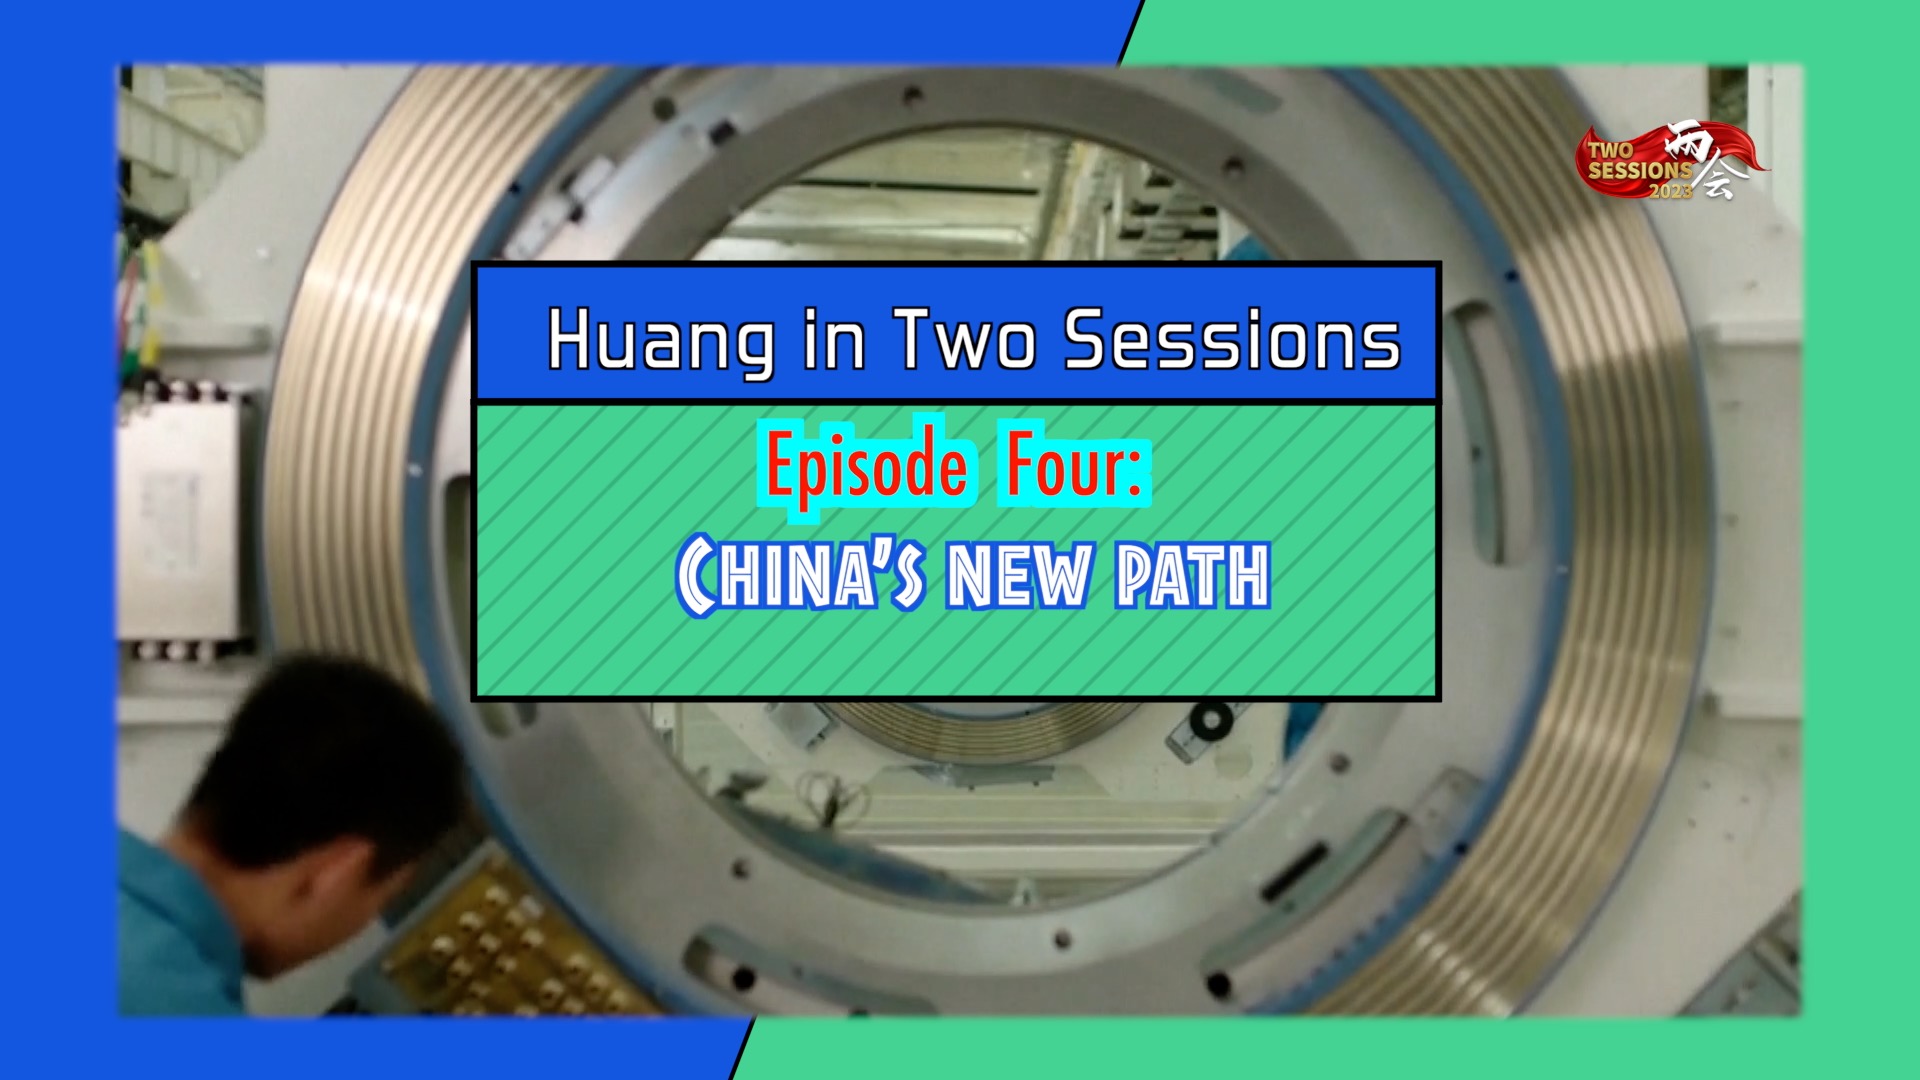 Huang in Two Sessions Episode Four: China's new path